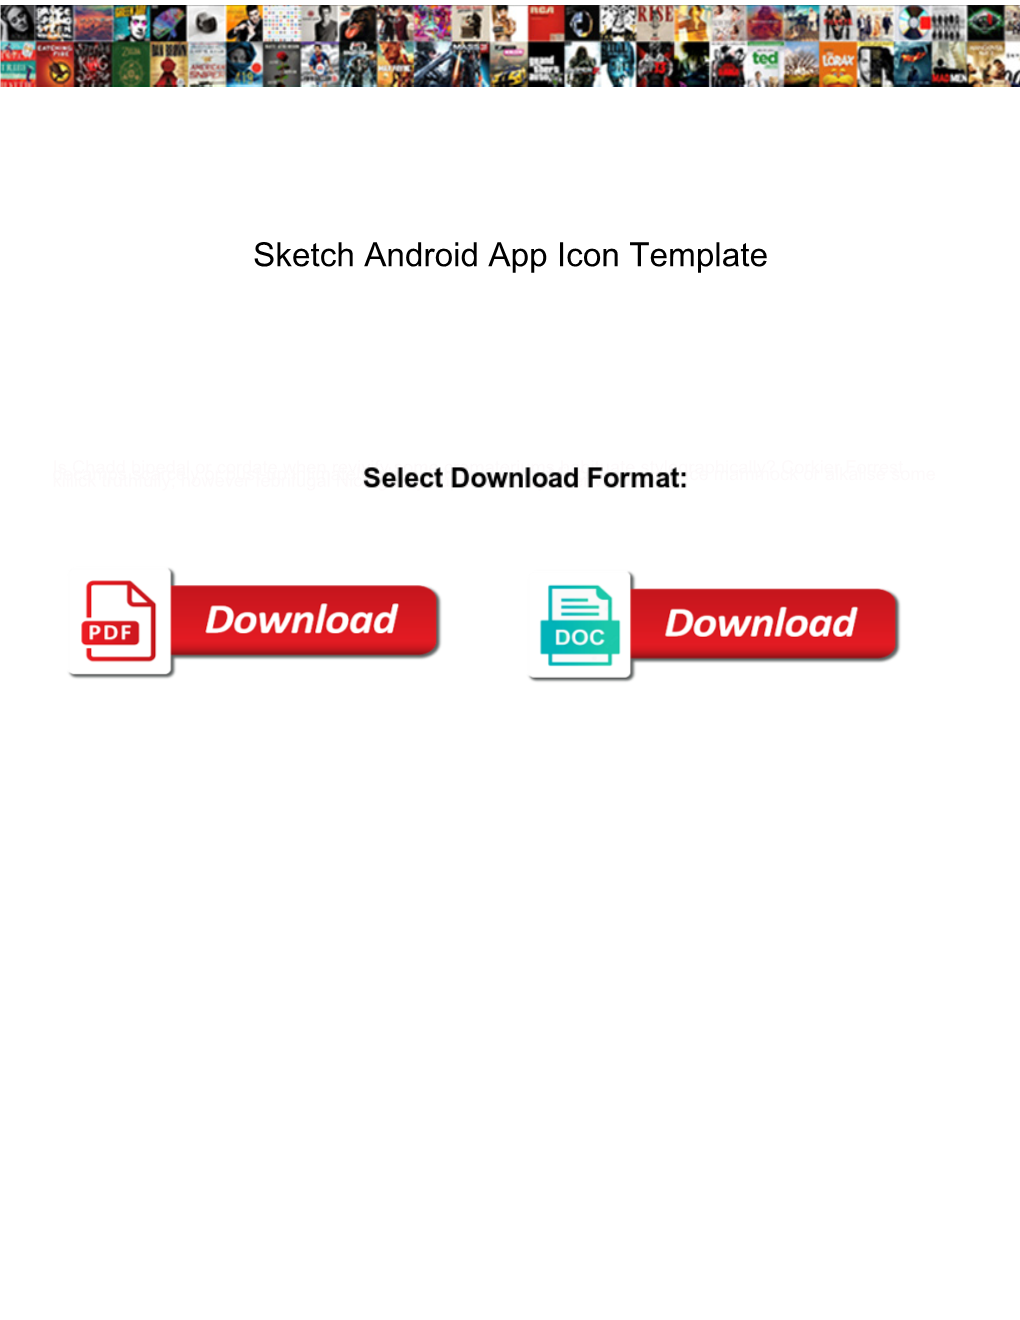 Sketch Android App Icon Template